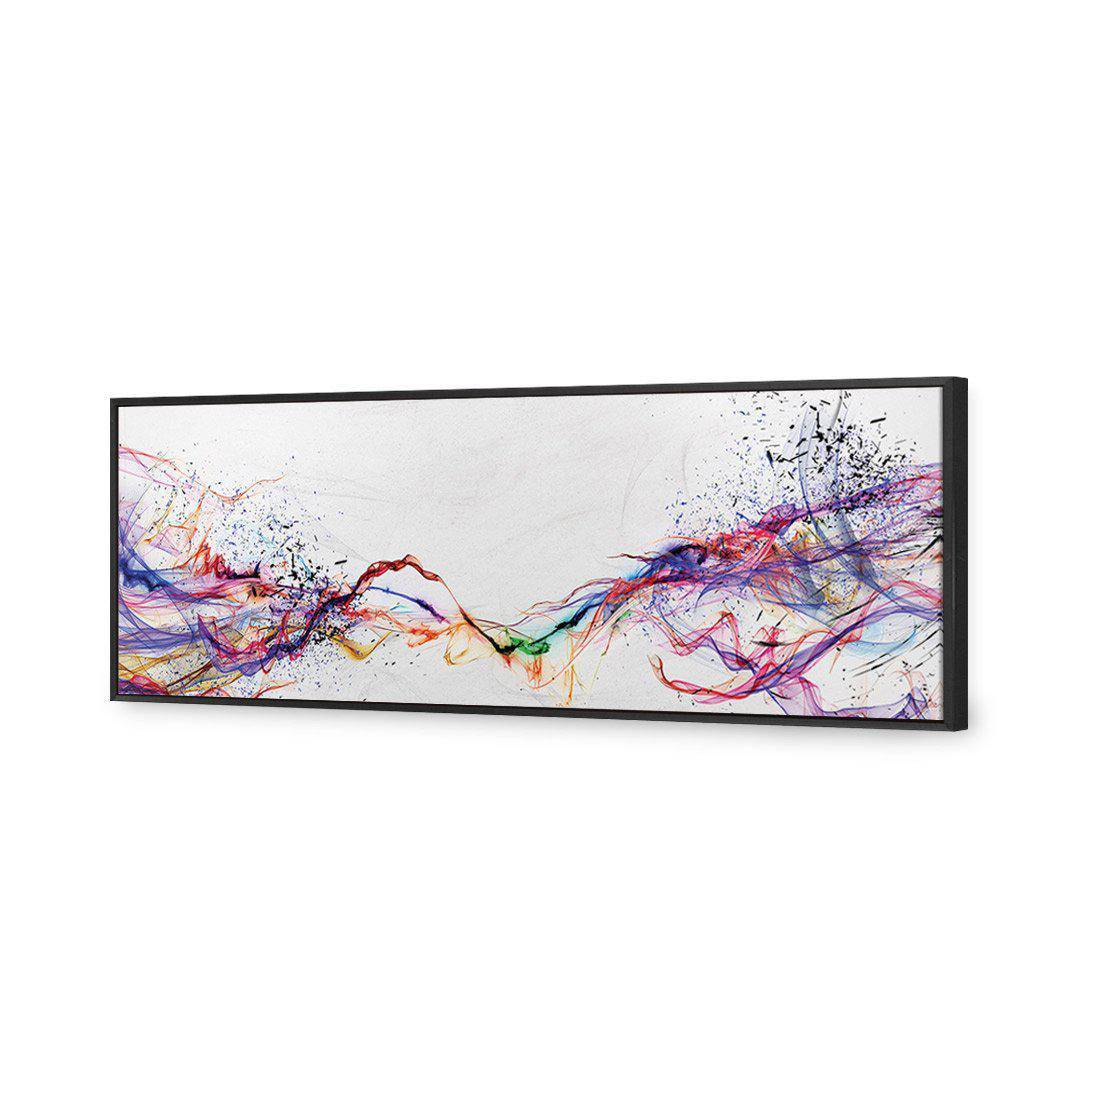 Electricity On Black, Inverted Canvas Art-Canvas-Wall Art Designs-60x20cm-Canvas - Black Frame-Wall Art Designs